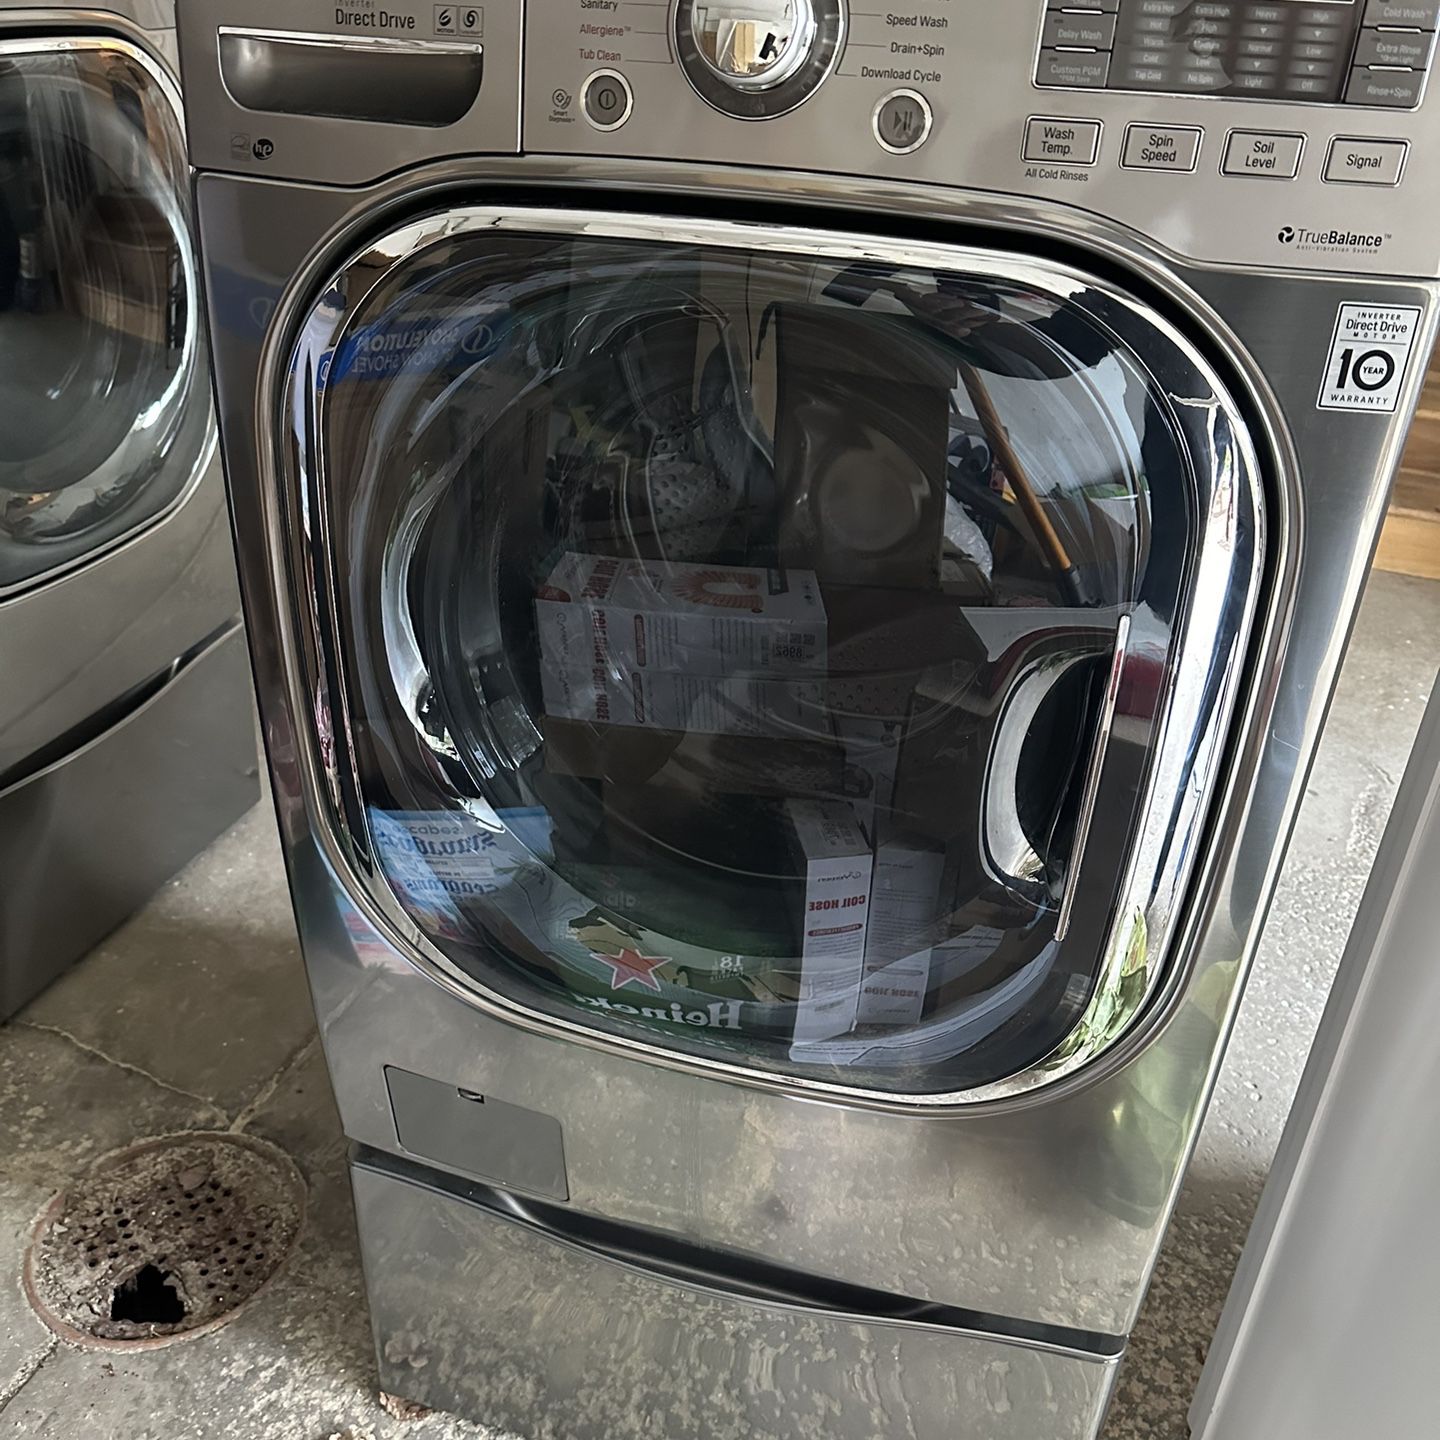 LG Washer And Dryer - Includes Matching Pedestals 